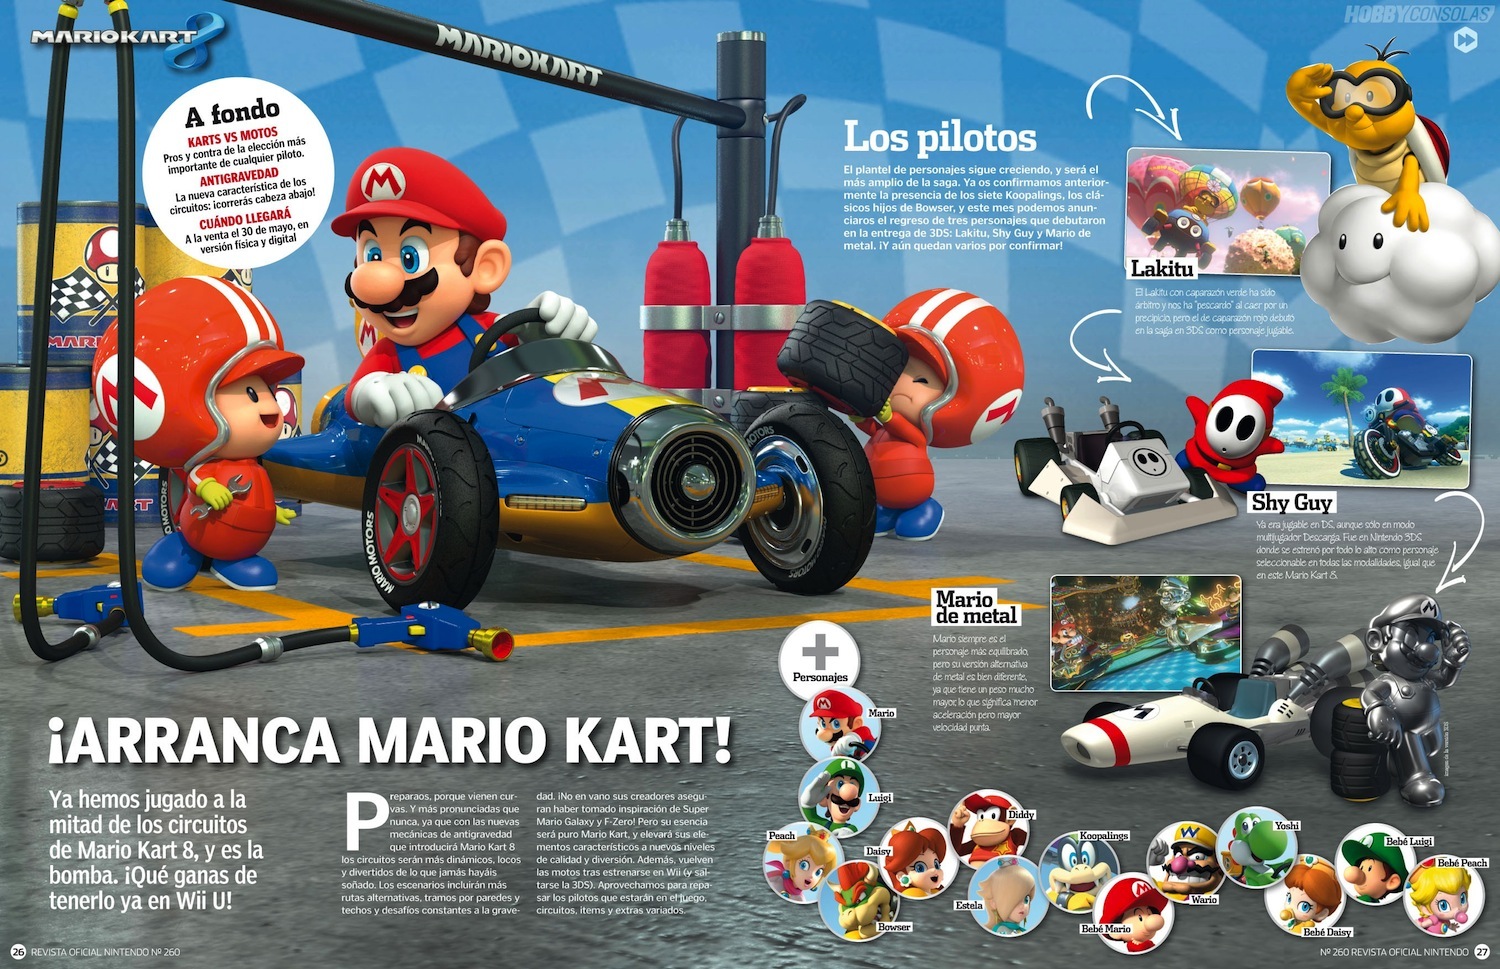 What Mario Kart could learn from Sonic & All-Stars Racing 